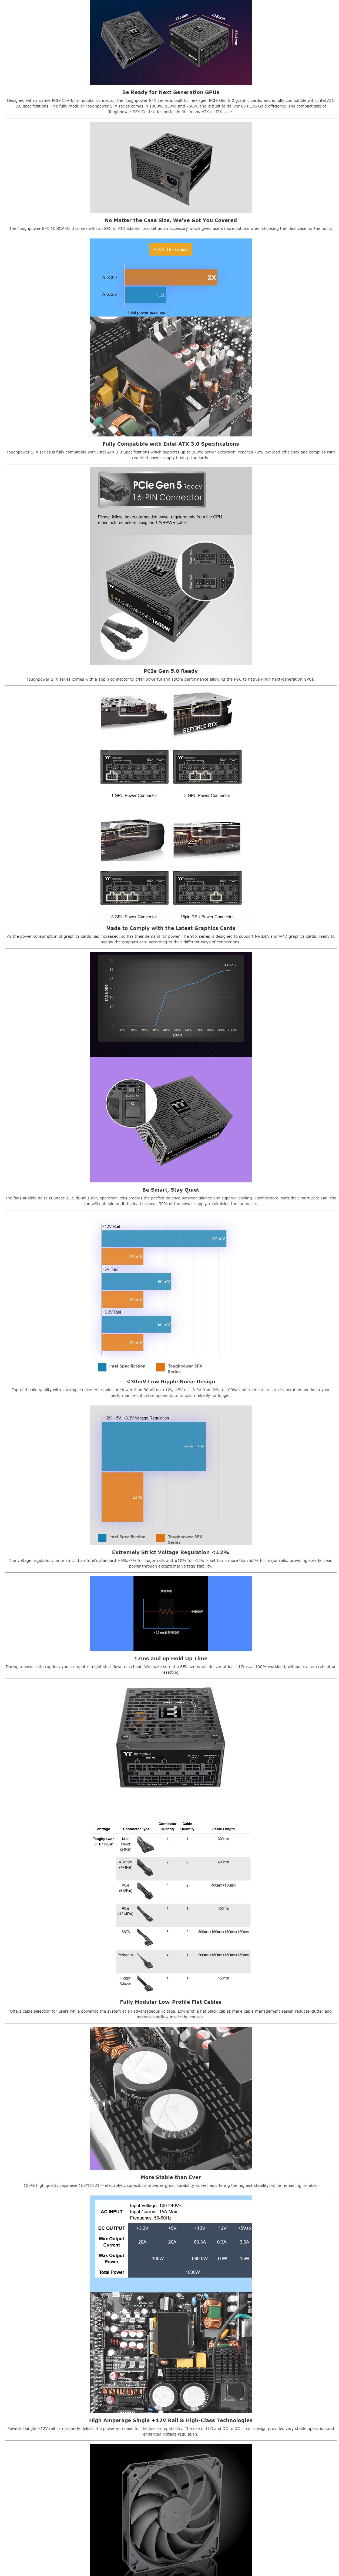 A large marketing image providing additional information about the product Thermaltake Toughpower SFX - 1000W 80PLUS Gold PCIe 5.0 Modular PSU - Additional alt info not provided